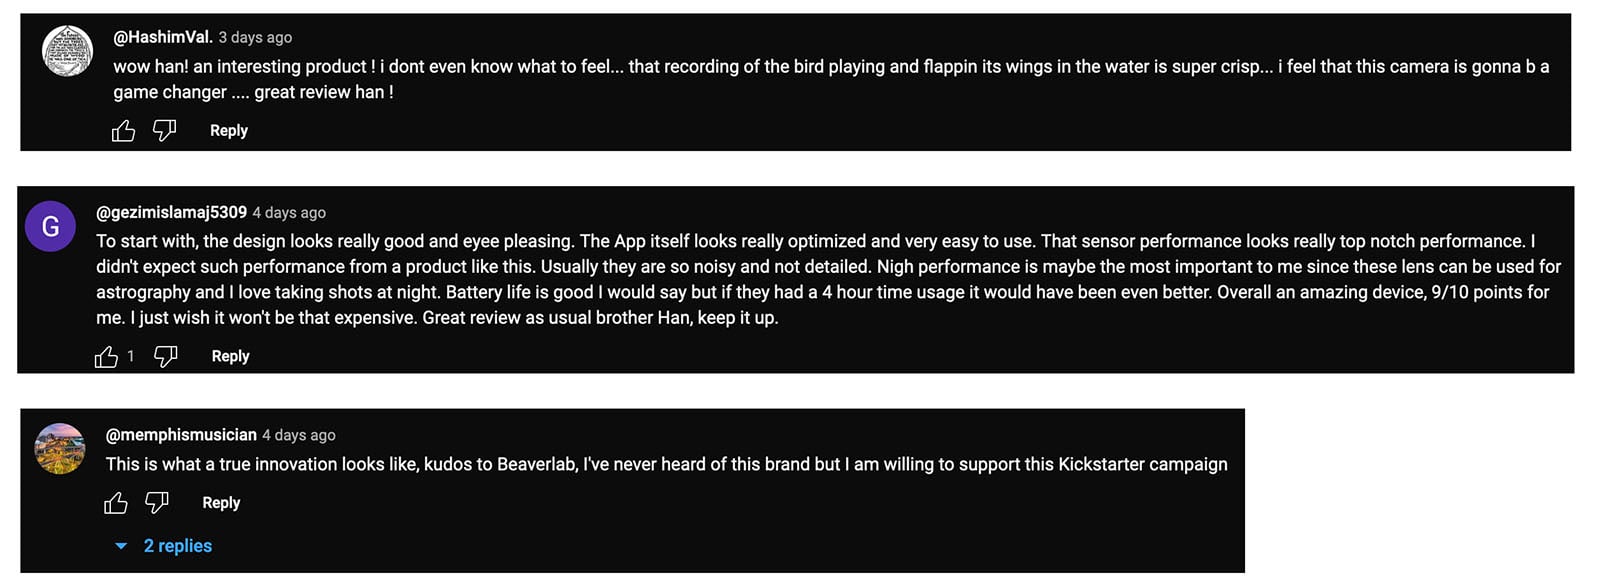 Screenshot of youtube comments under a video, featuring positive reactions from users admiring a product's innovation, performance, and design. one user expresses their intent to support the product on kickstarter.